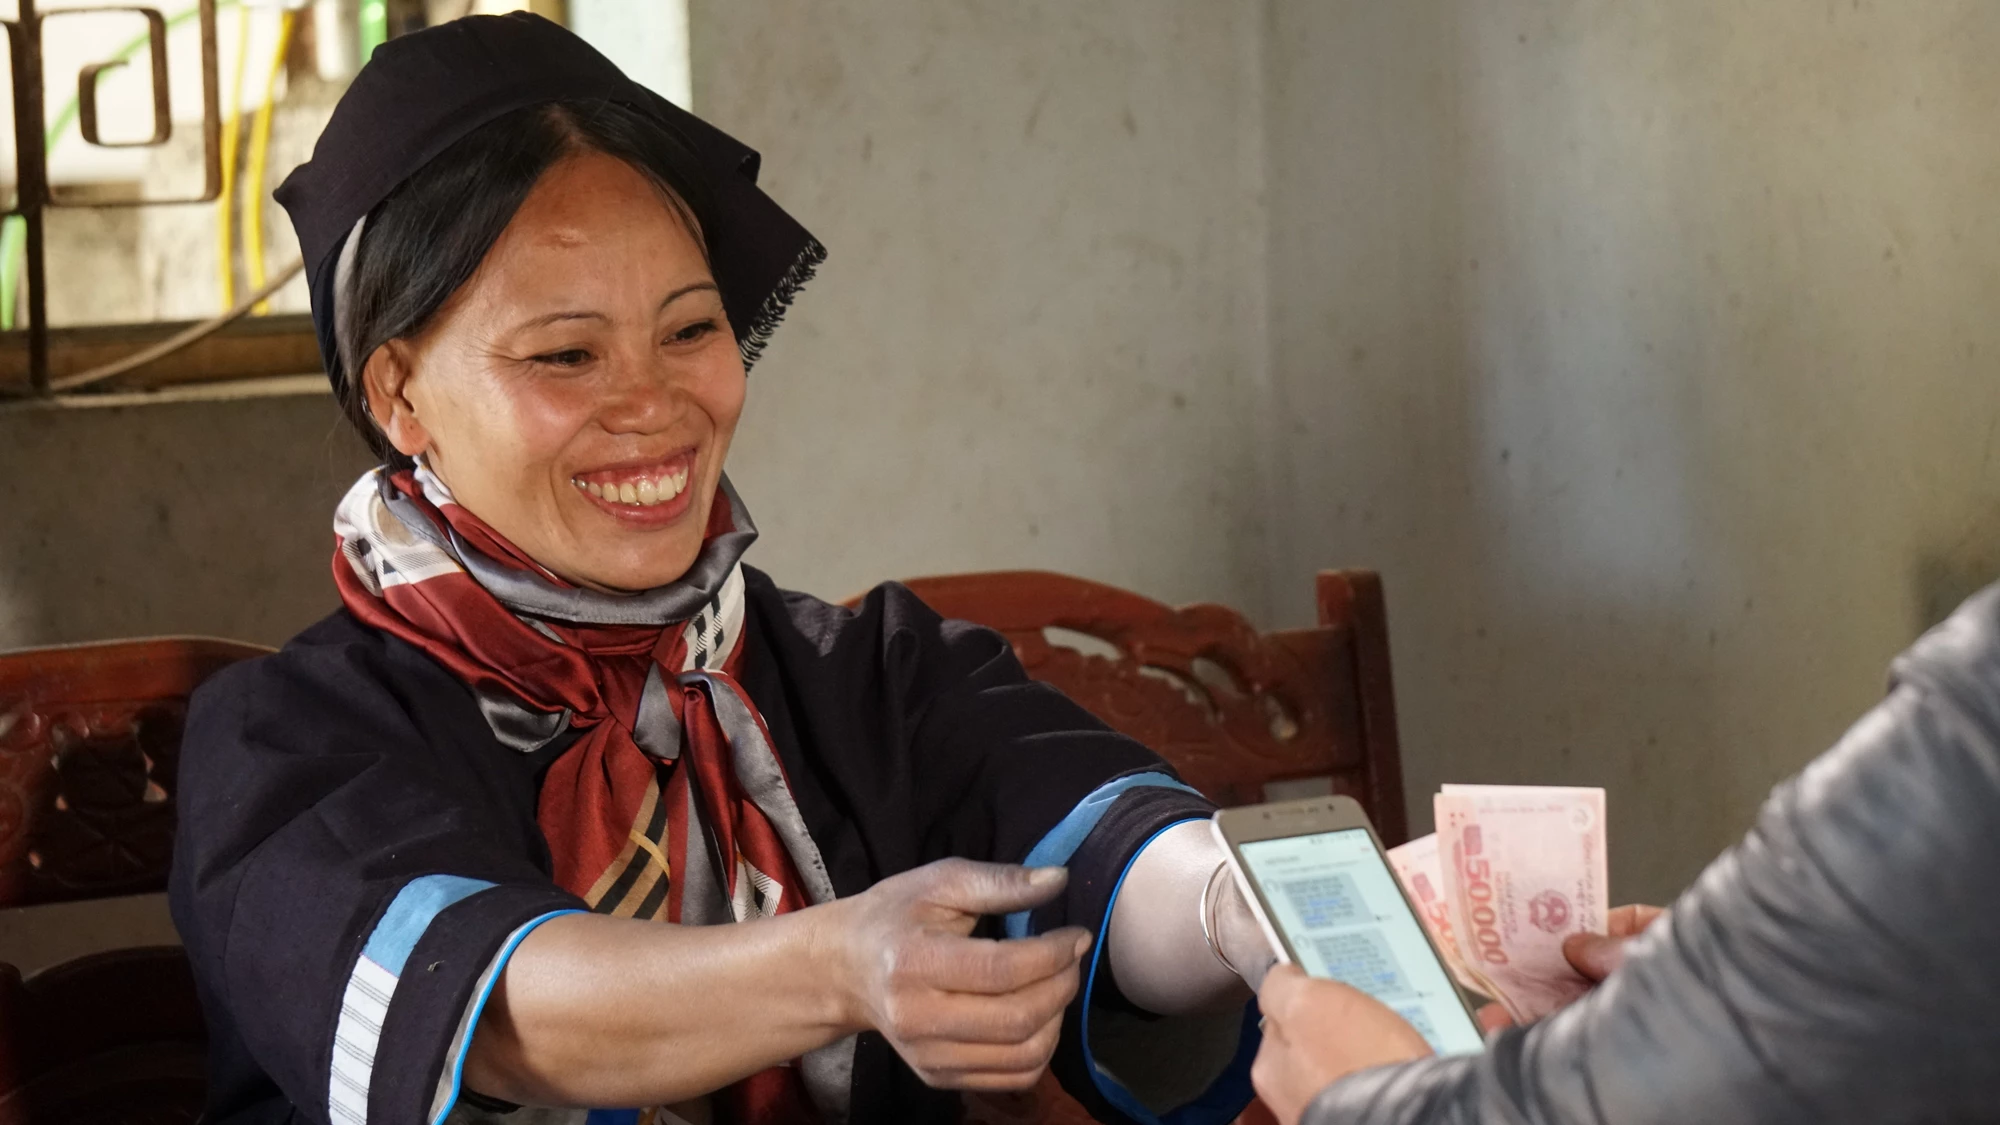 Mobile money. A pilot scheme supported by the World Bank allows members of the ethic minorities in Cao Bang Province, Vietnam to receive their monthly social benefits with just a text message and their ID. 